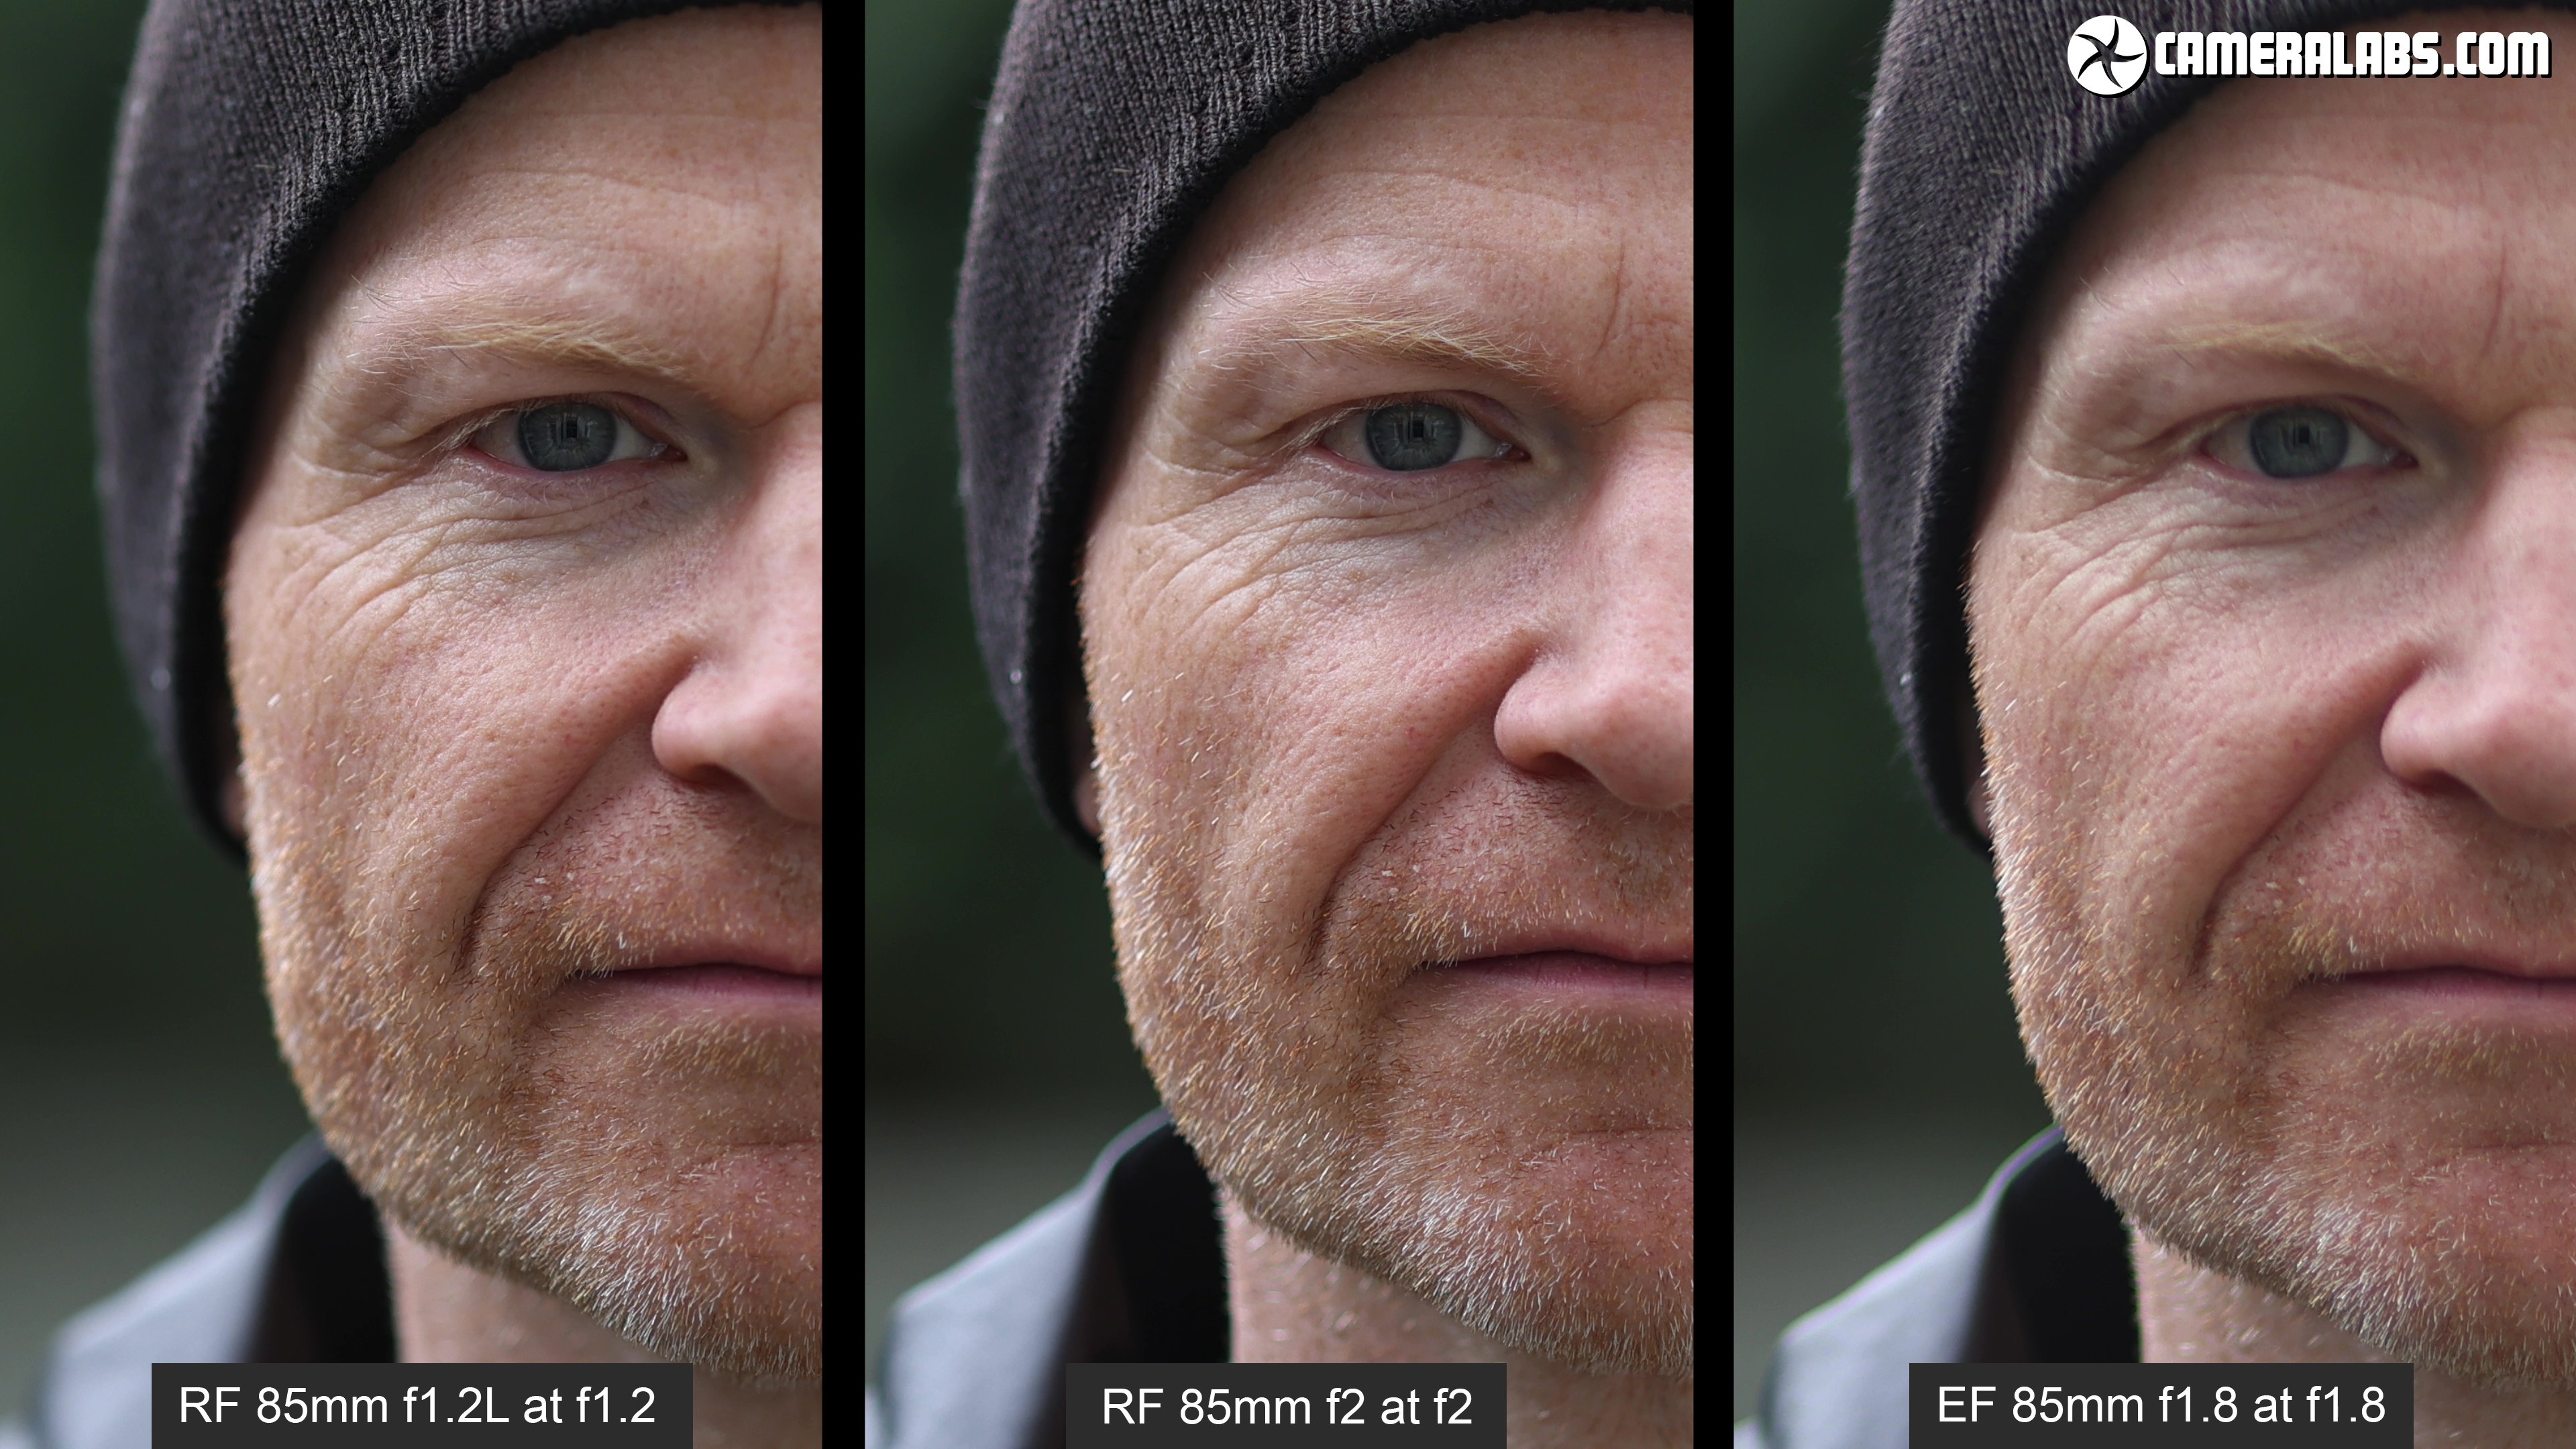 Canon RF 85mm f2 Macro review | Cameralabs